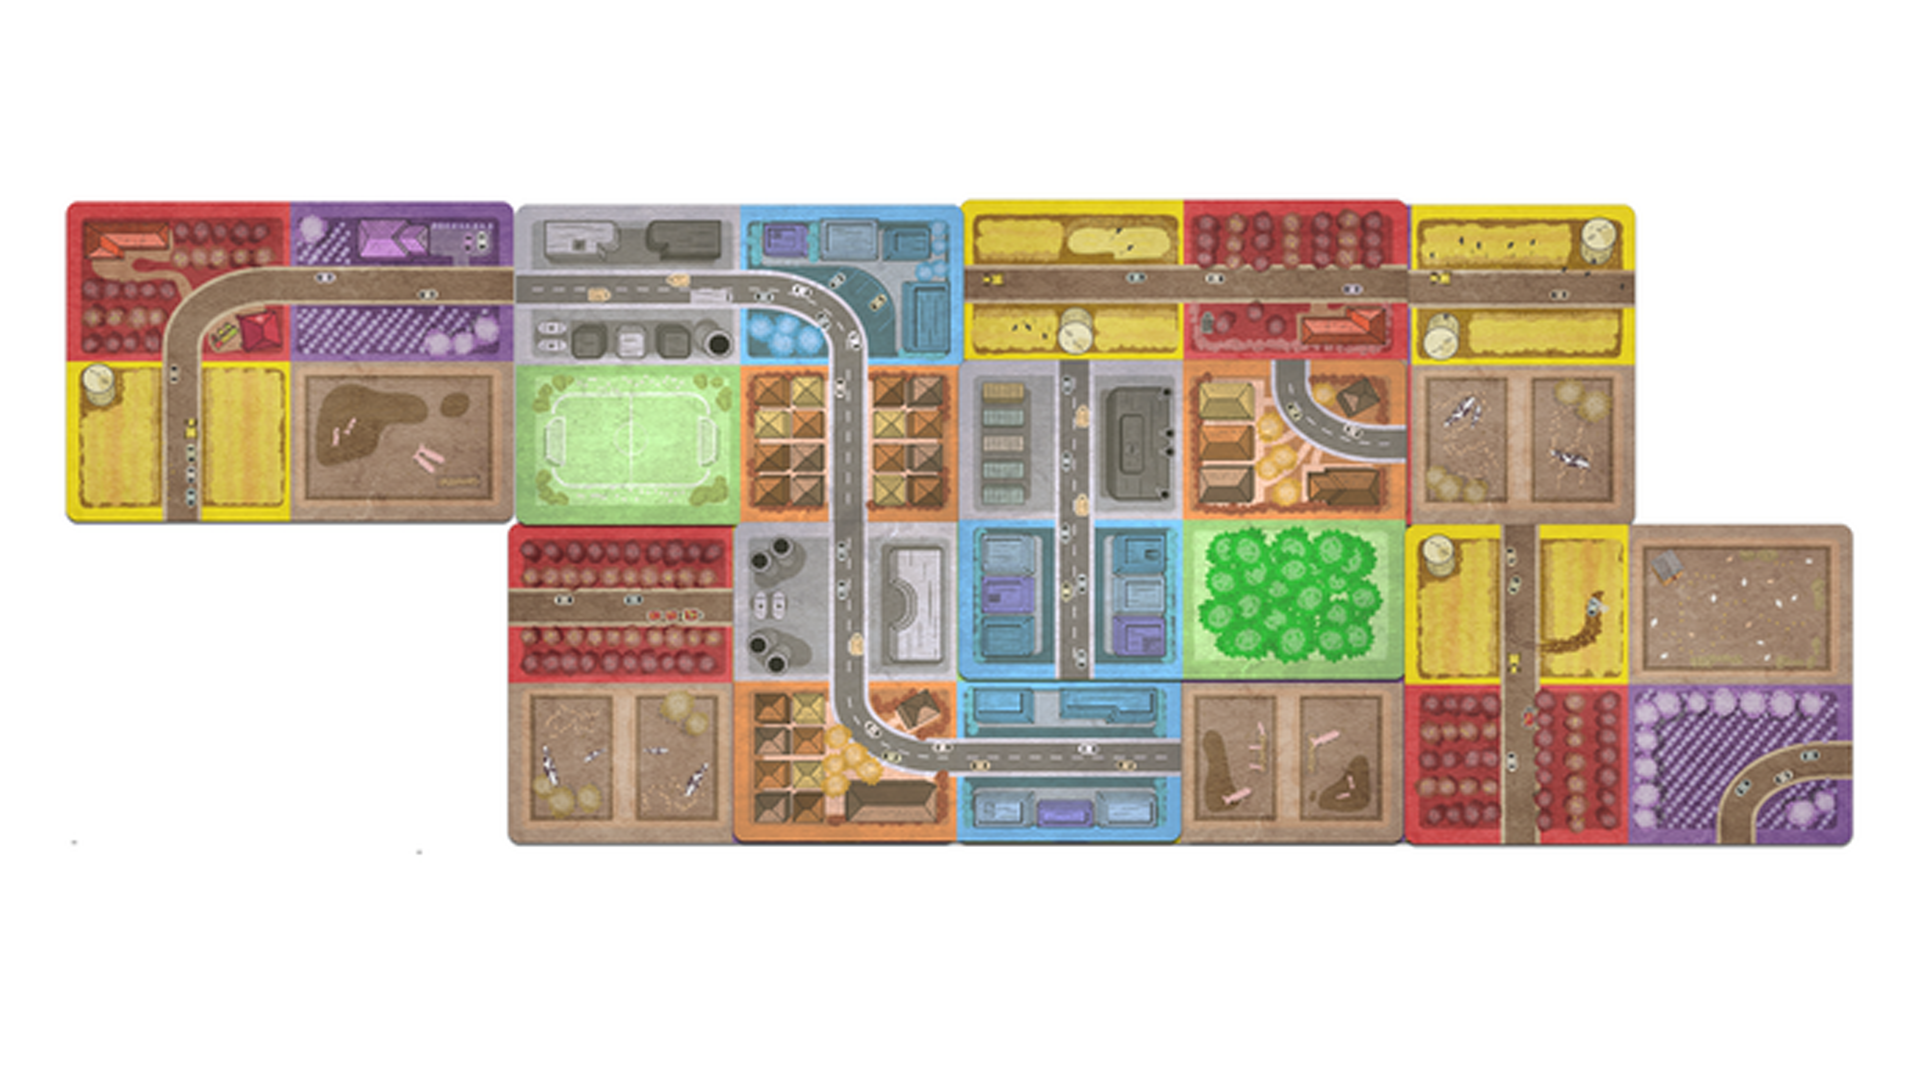 Agropolis board game layout